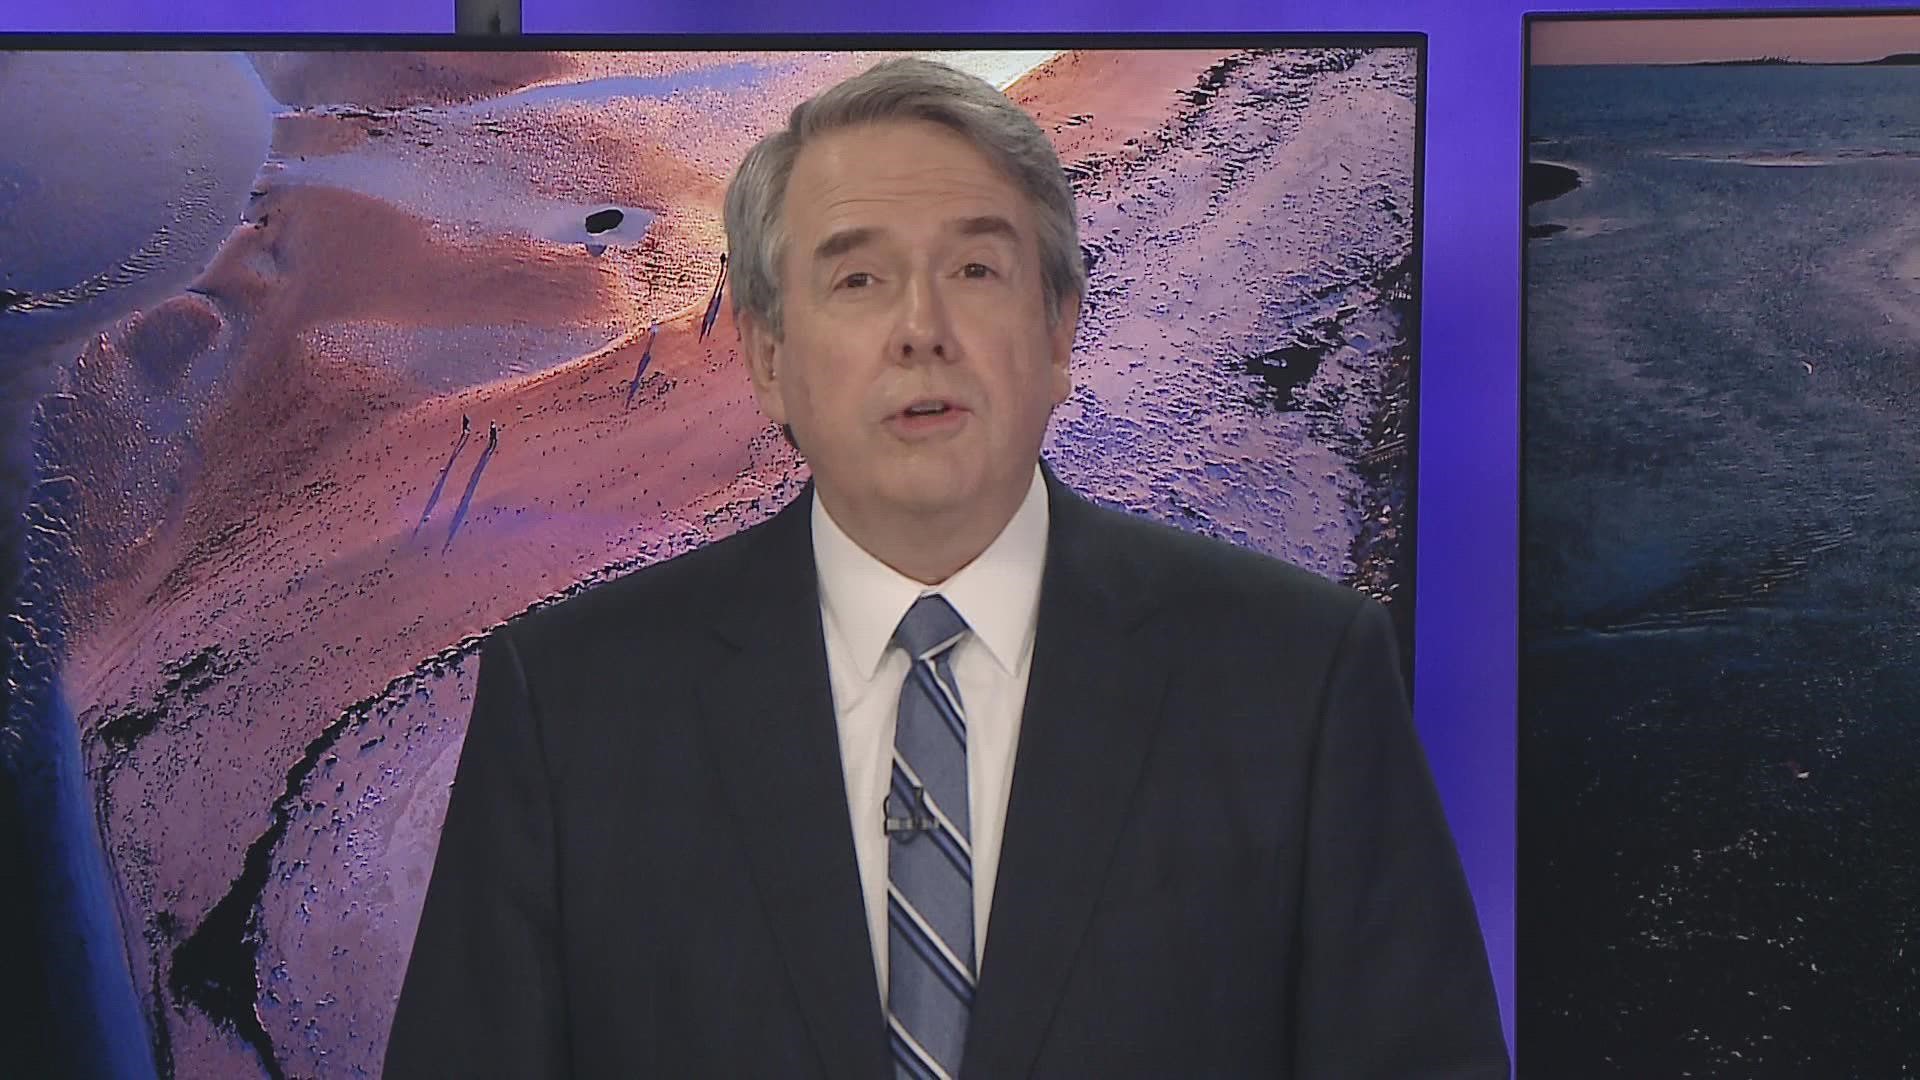 After his 43-year career at NEWS CENTER Maine, Pat Callaghan officially begins his next chapter.